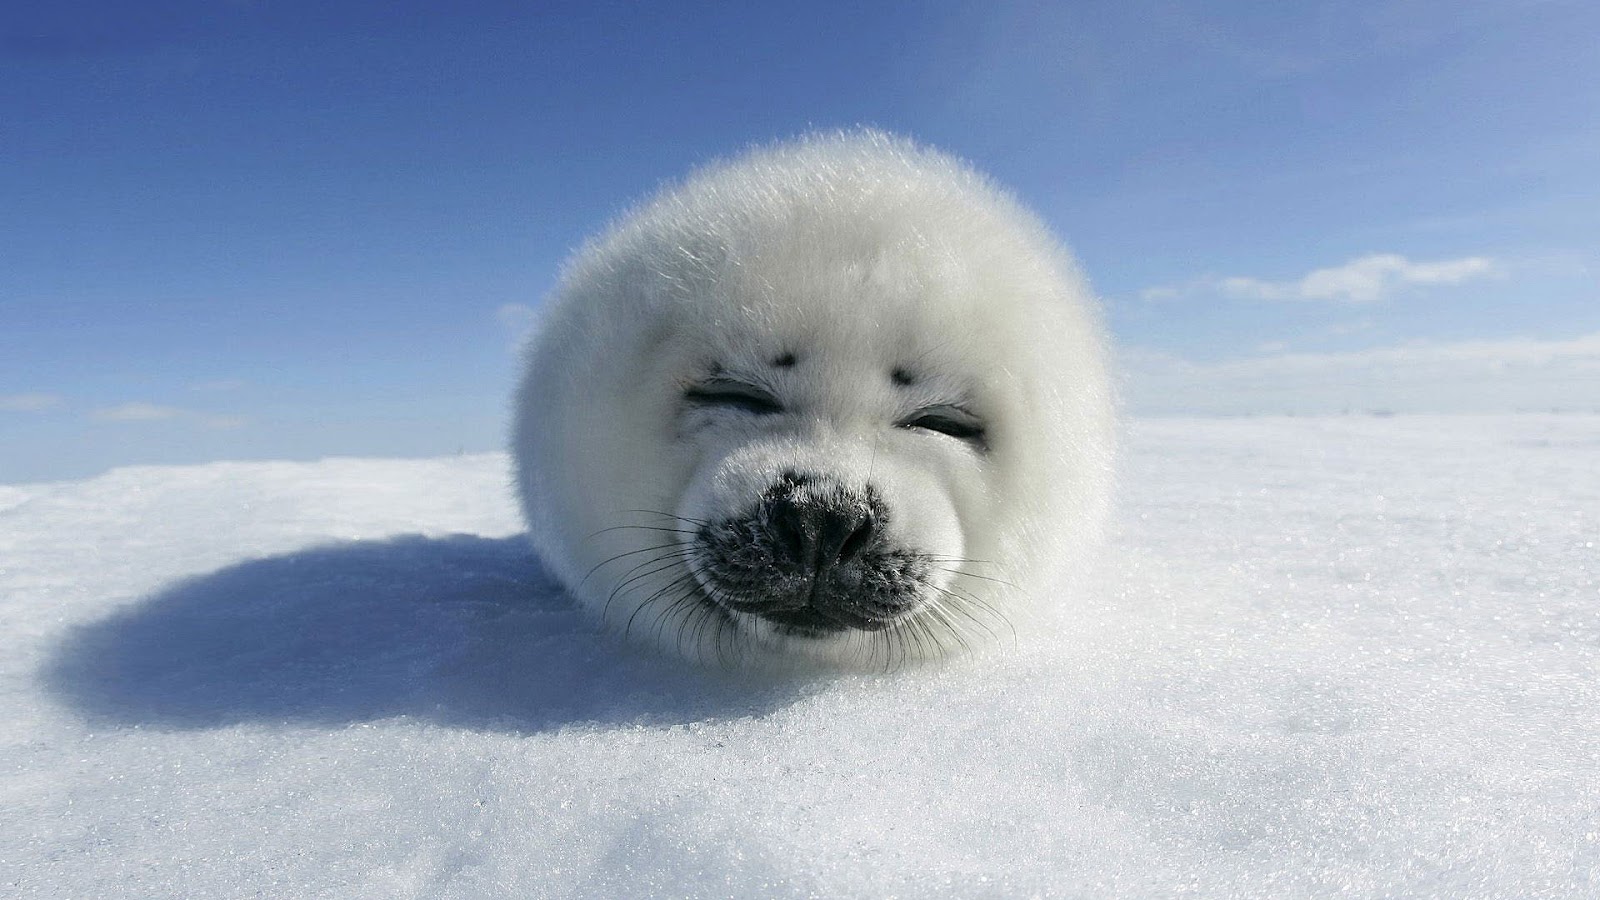 hd baby seal wallpaper with a baby seal resting on the snow hd seals